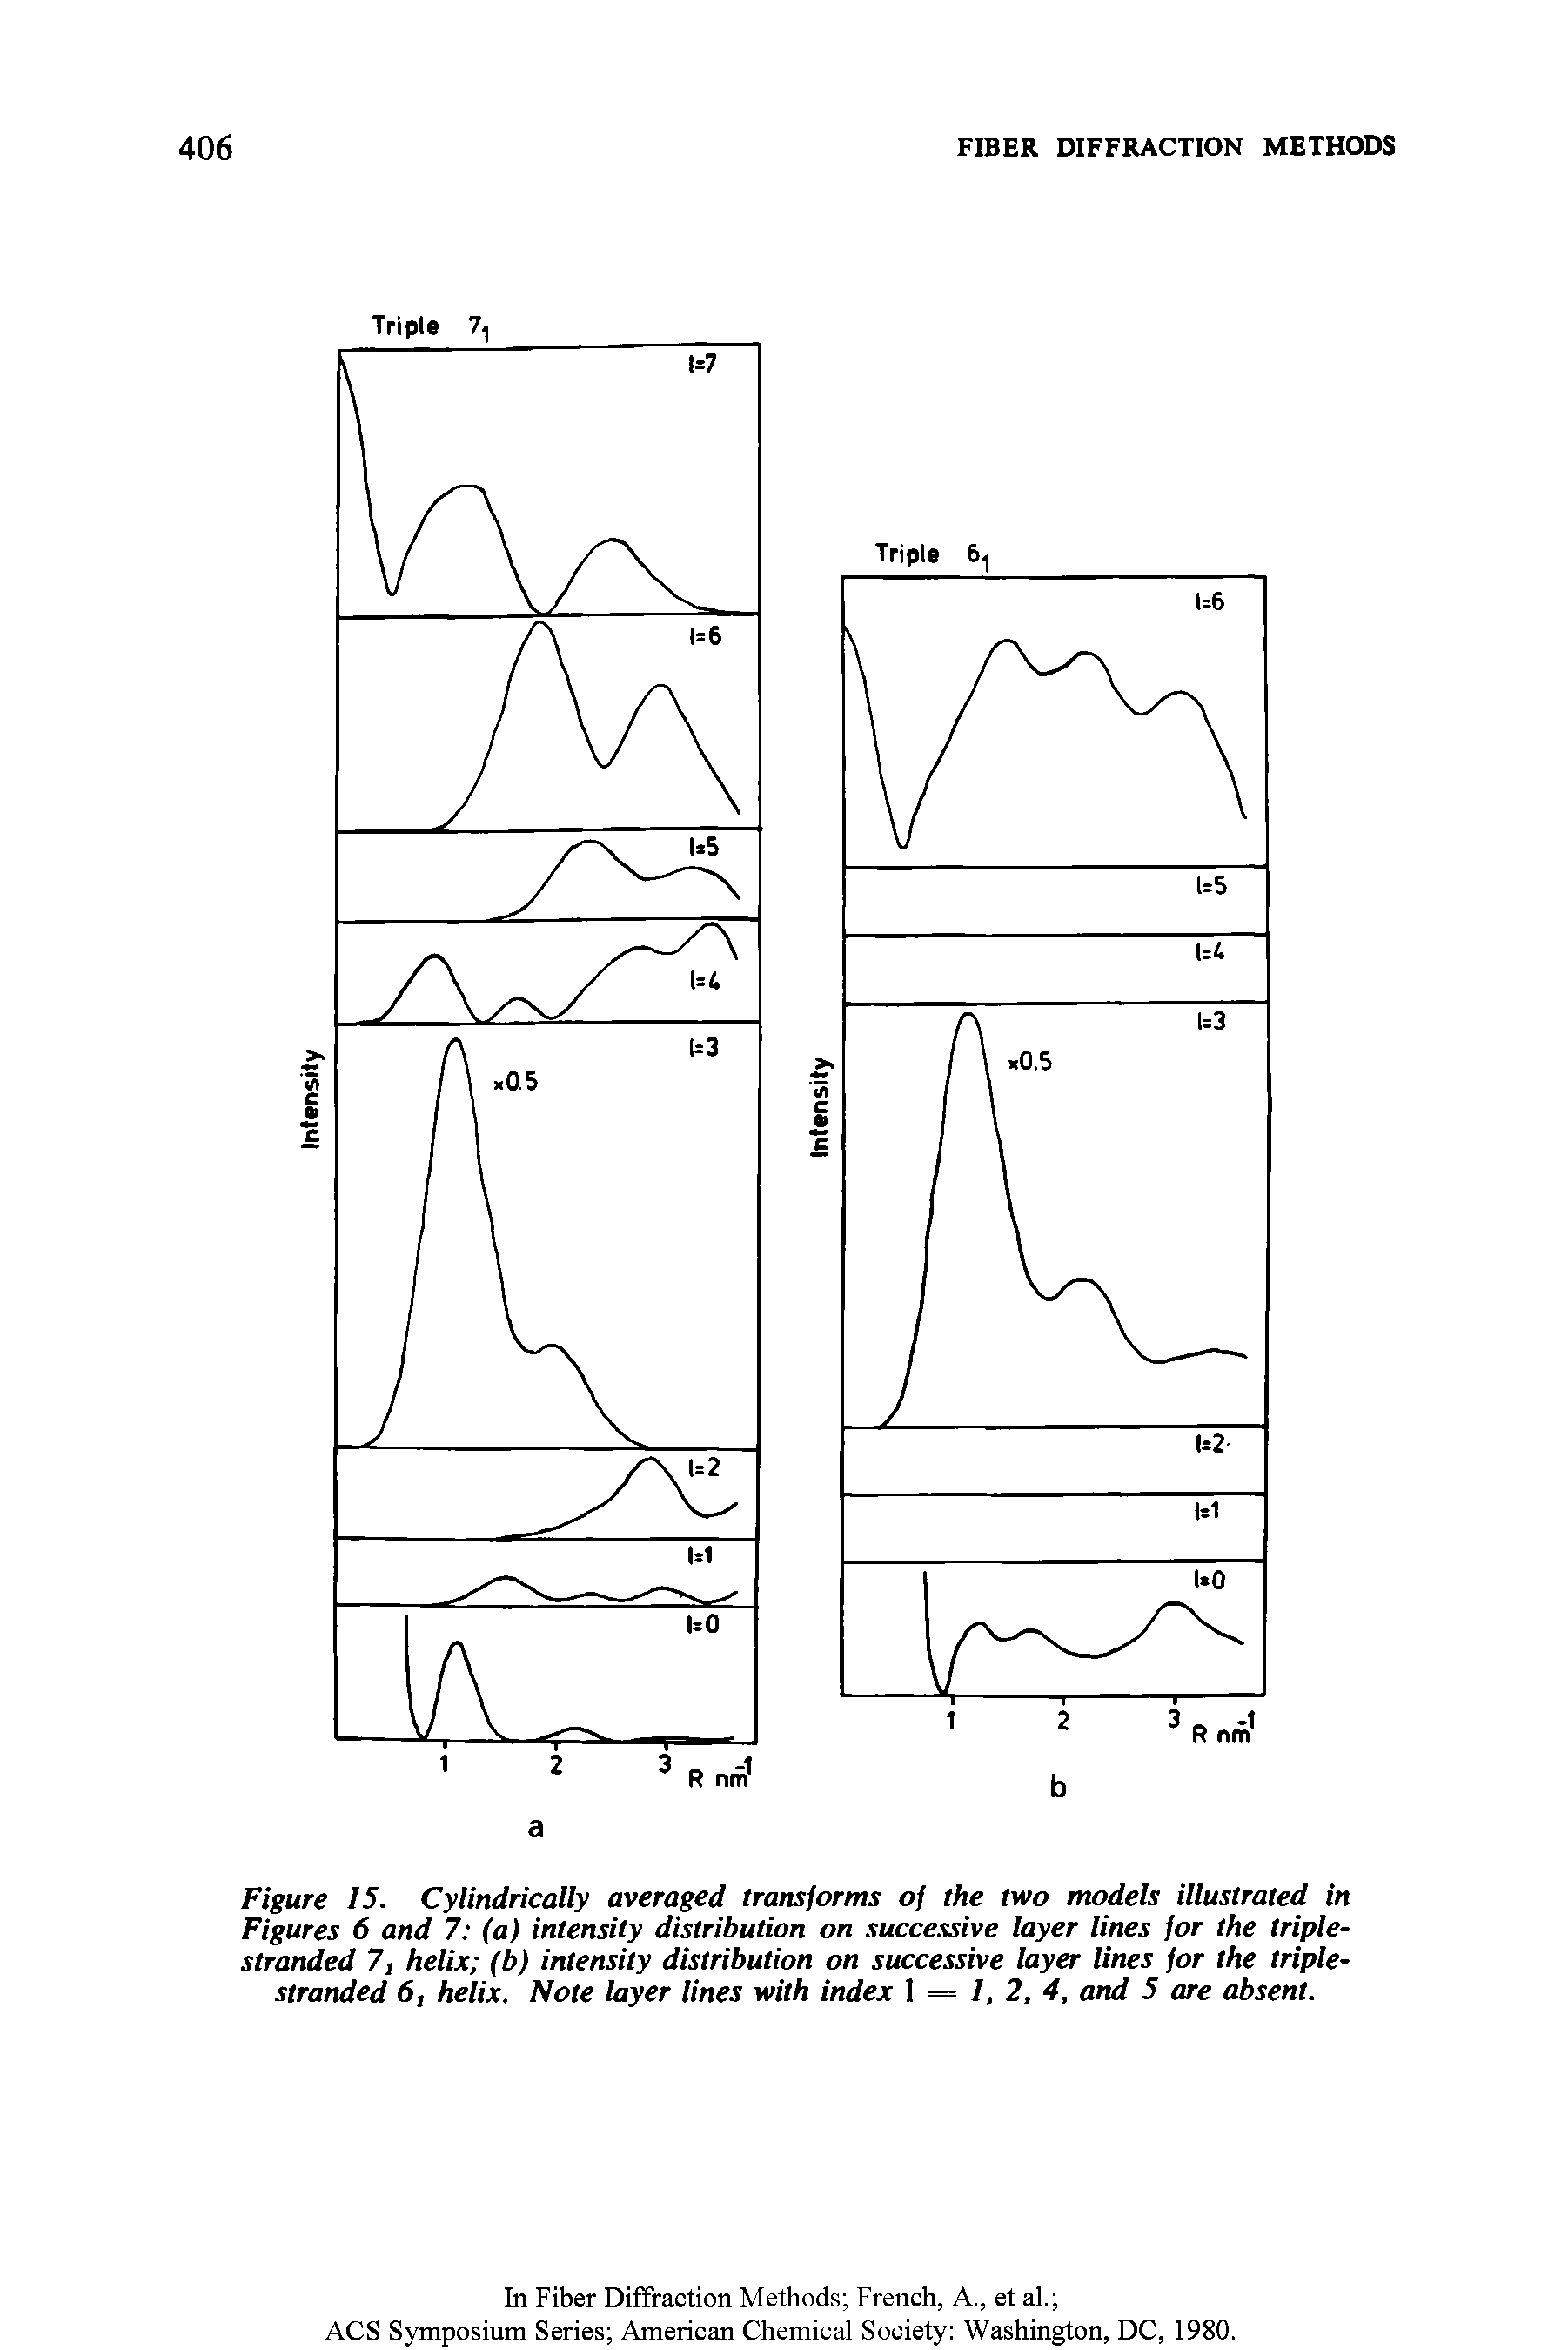 Figure 15. Cylindrically averaged transforms of the two models illustrated in Figures 6 and 7 (a) intensity distribution on successive layer lines for the triple-stranded 7, helix (b) intensity distribution on successive layer lines for the triple-stranded 6, helix. Note layer lines with index 1 = 1,2, 4, and 5 are absent.